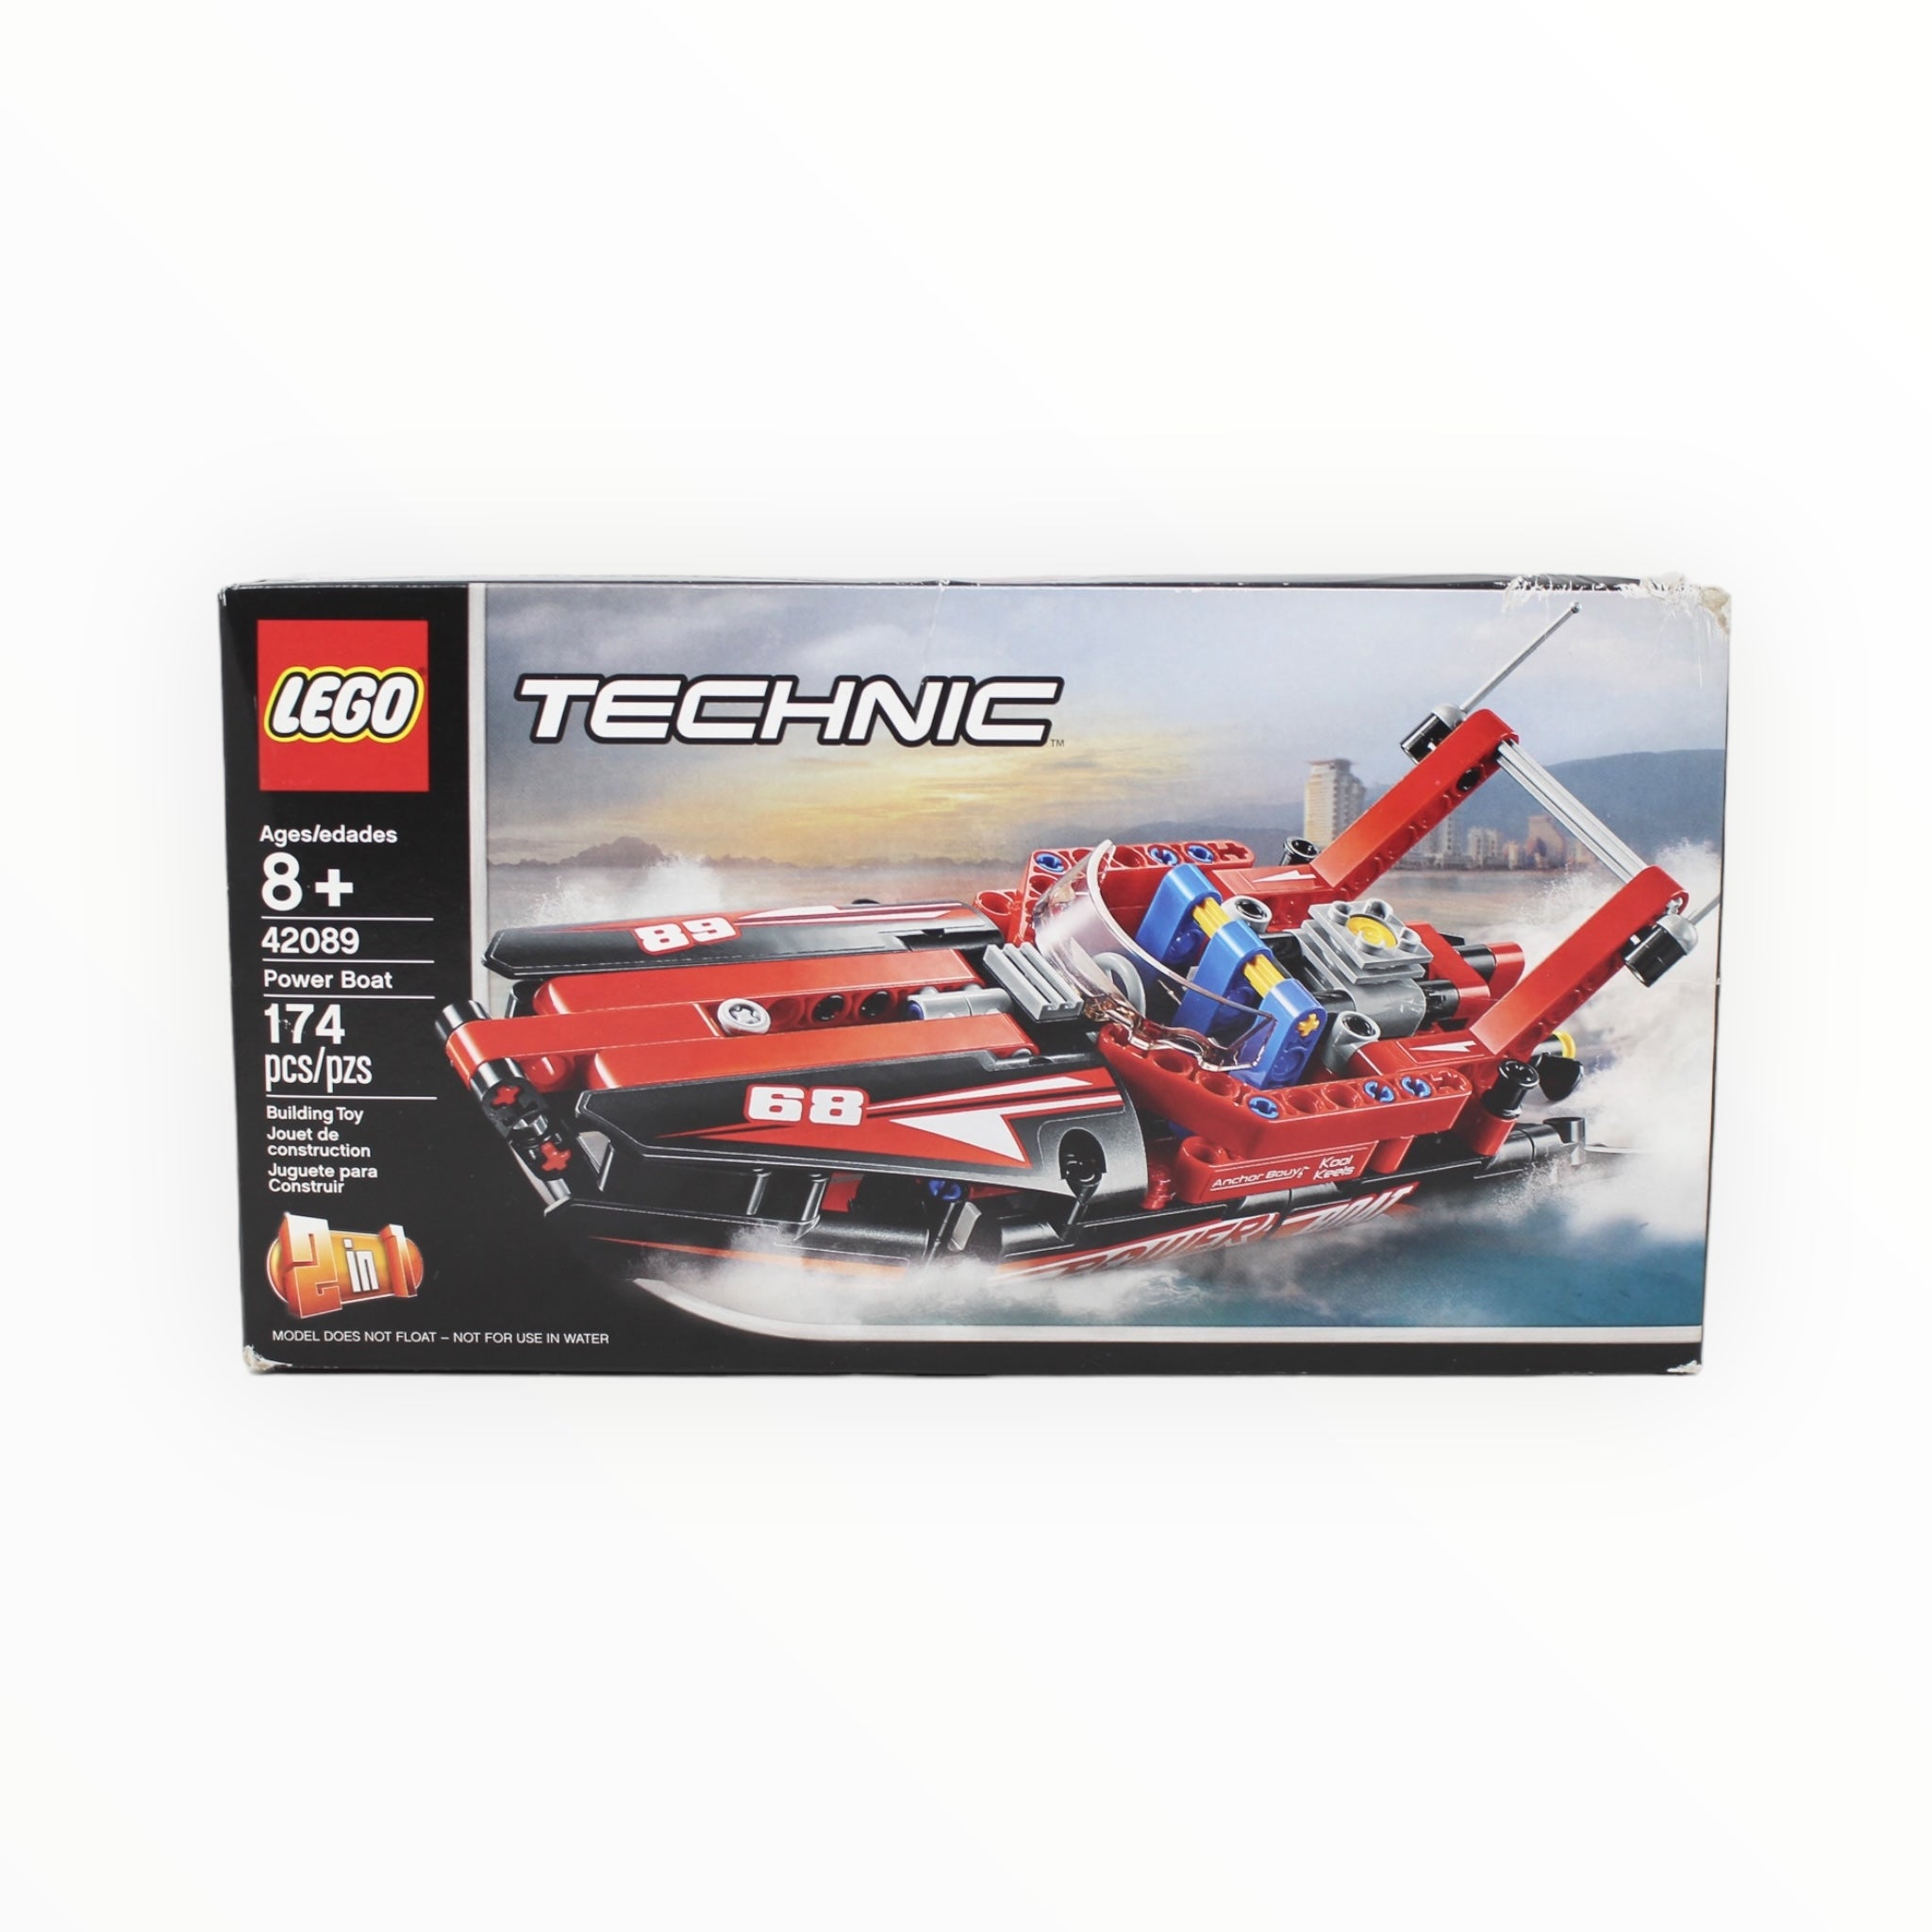 Certified Used Set 42089 Technic Power Boat